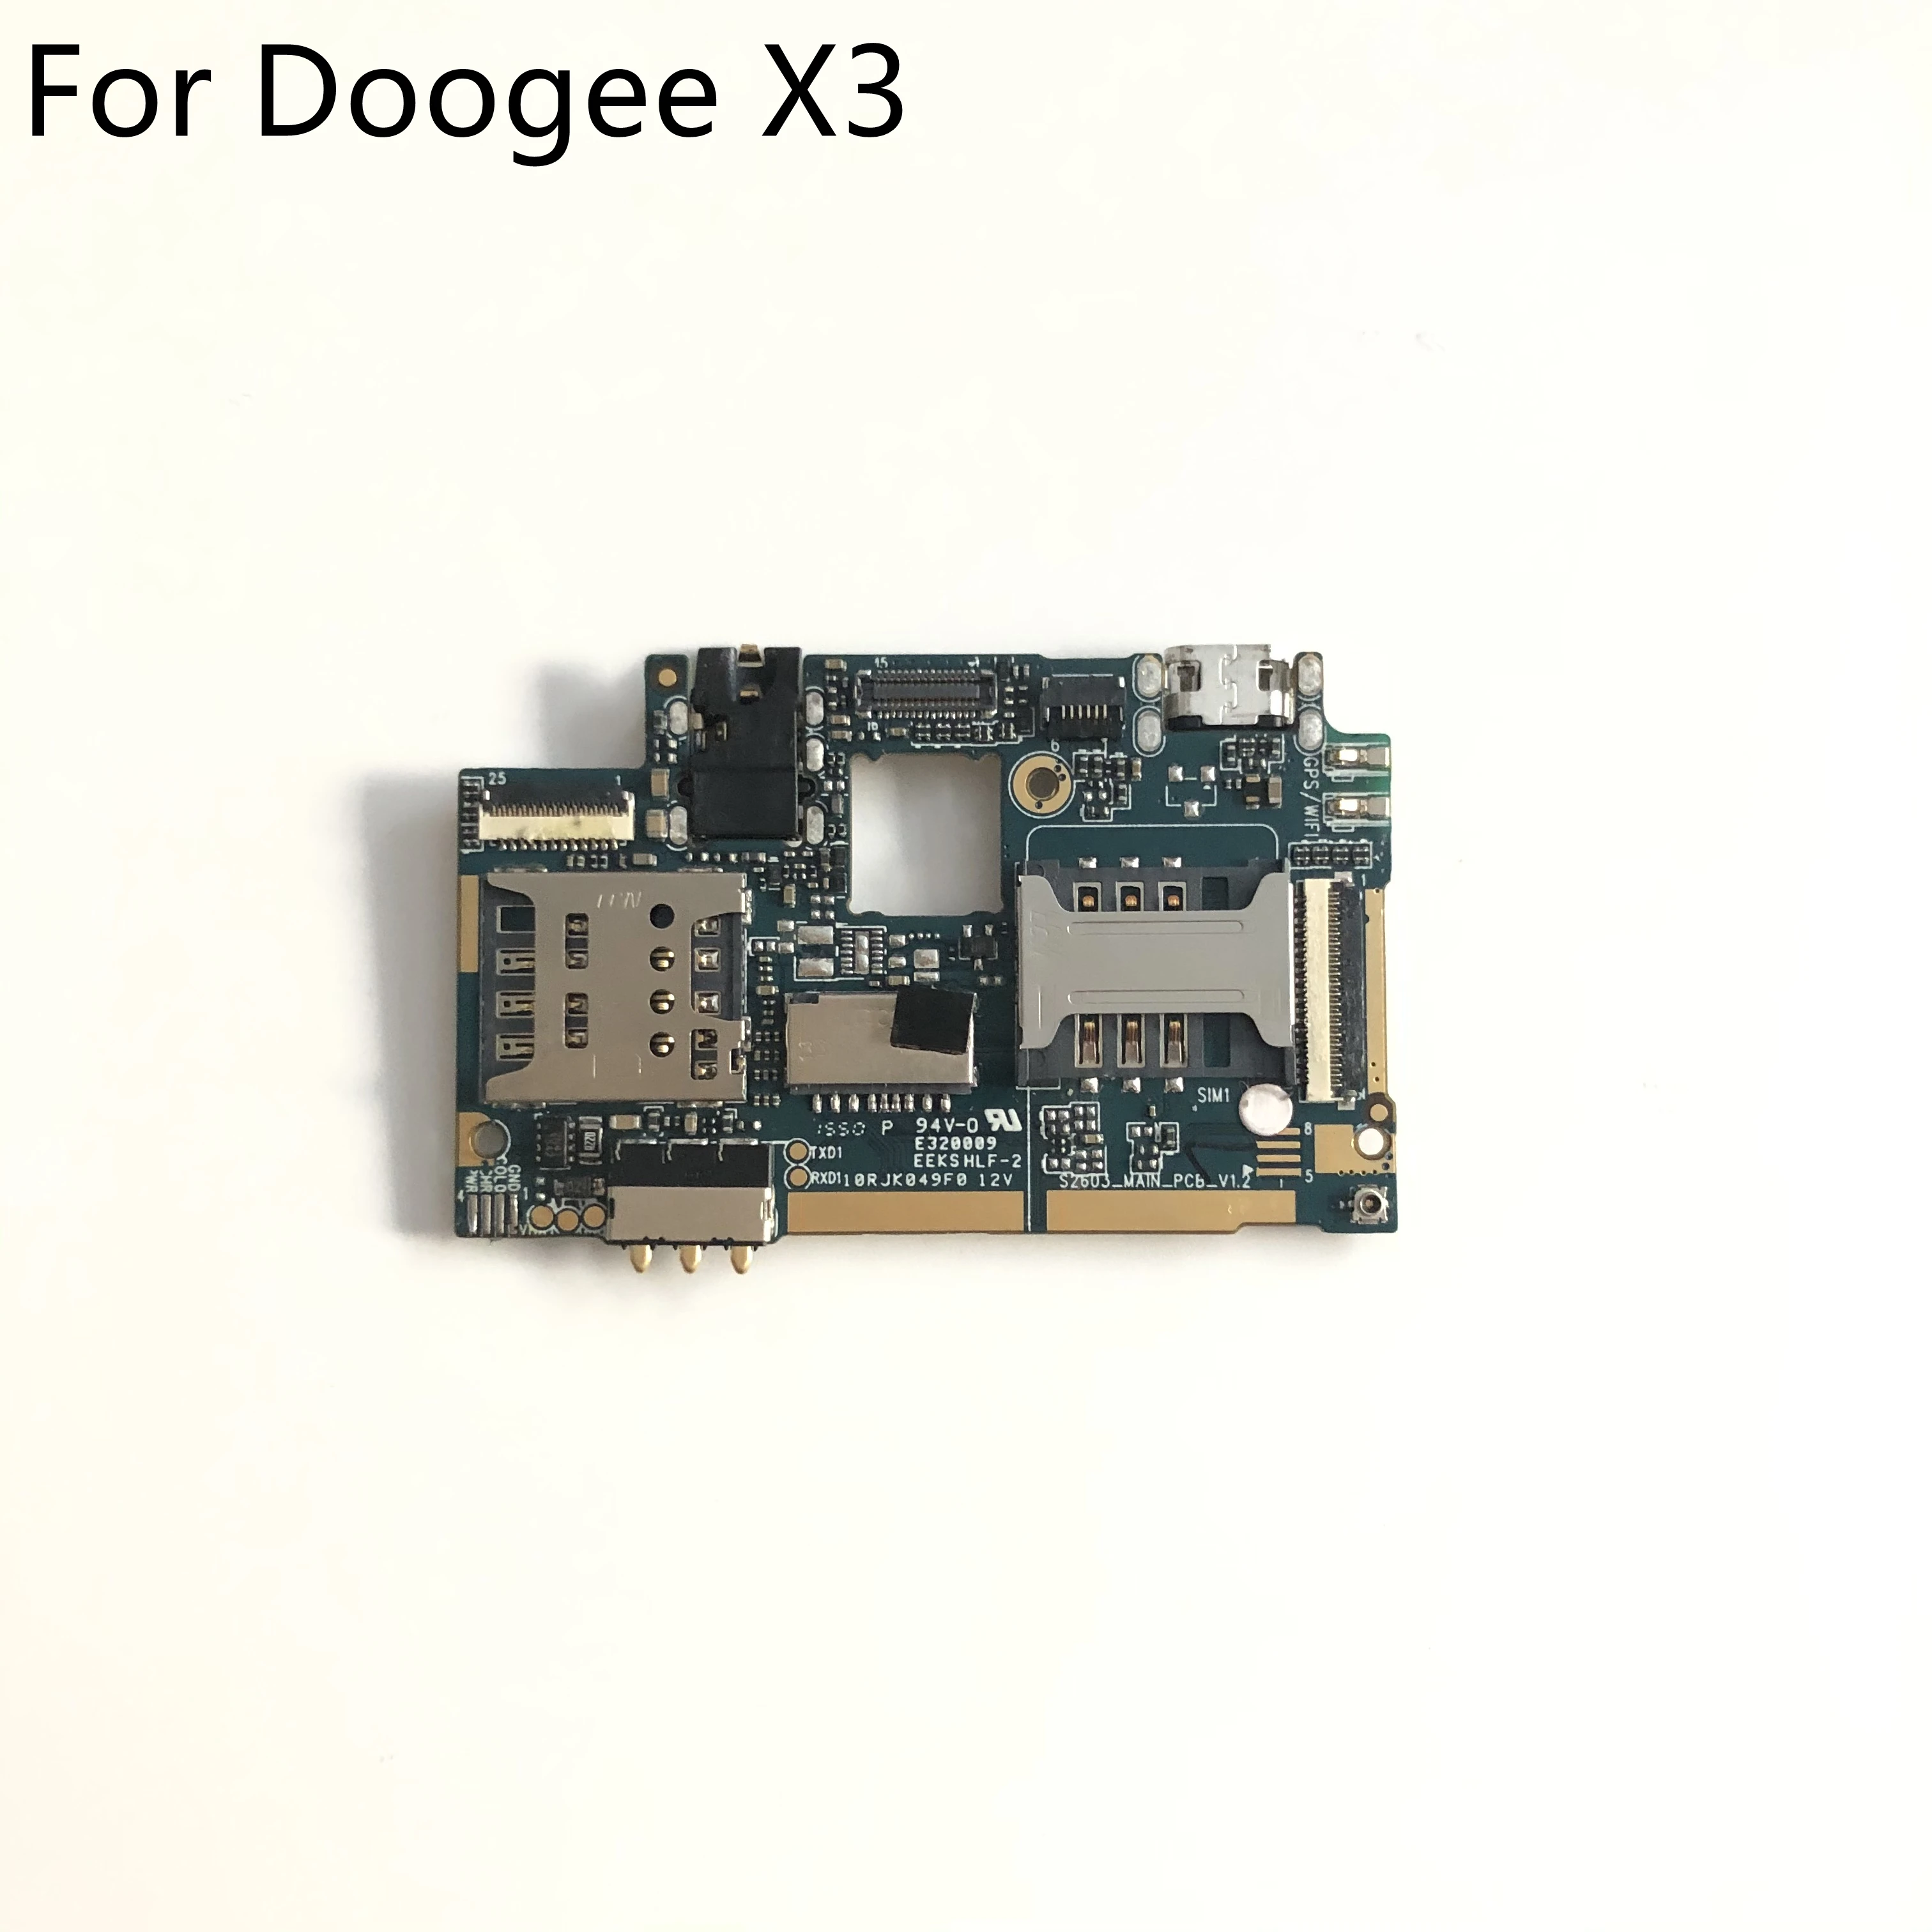 

Mainboard 1G RAM+8G ROM Motherboard For DOOGEE X3 MT6580 Quad Core 4.5 inch 854 x 480 Smartphone